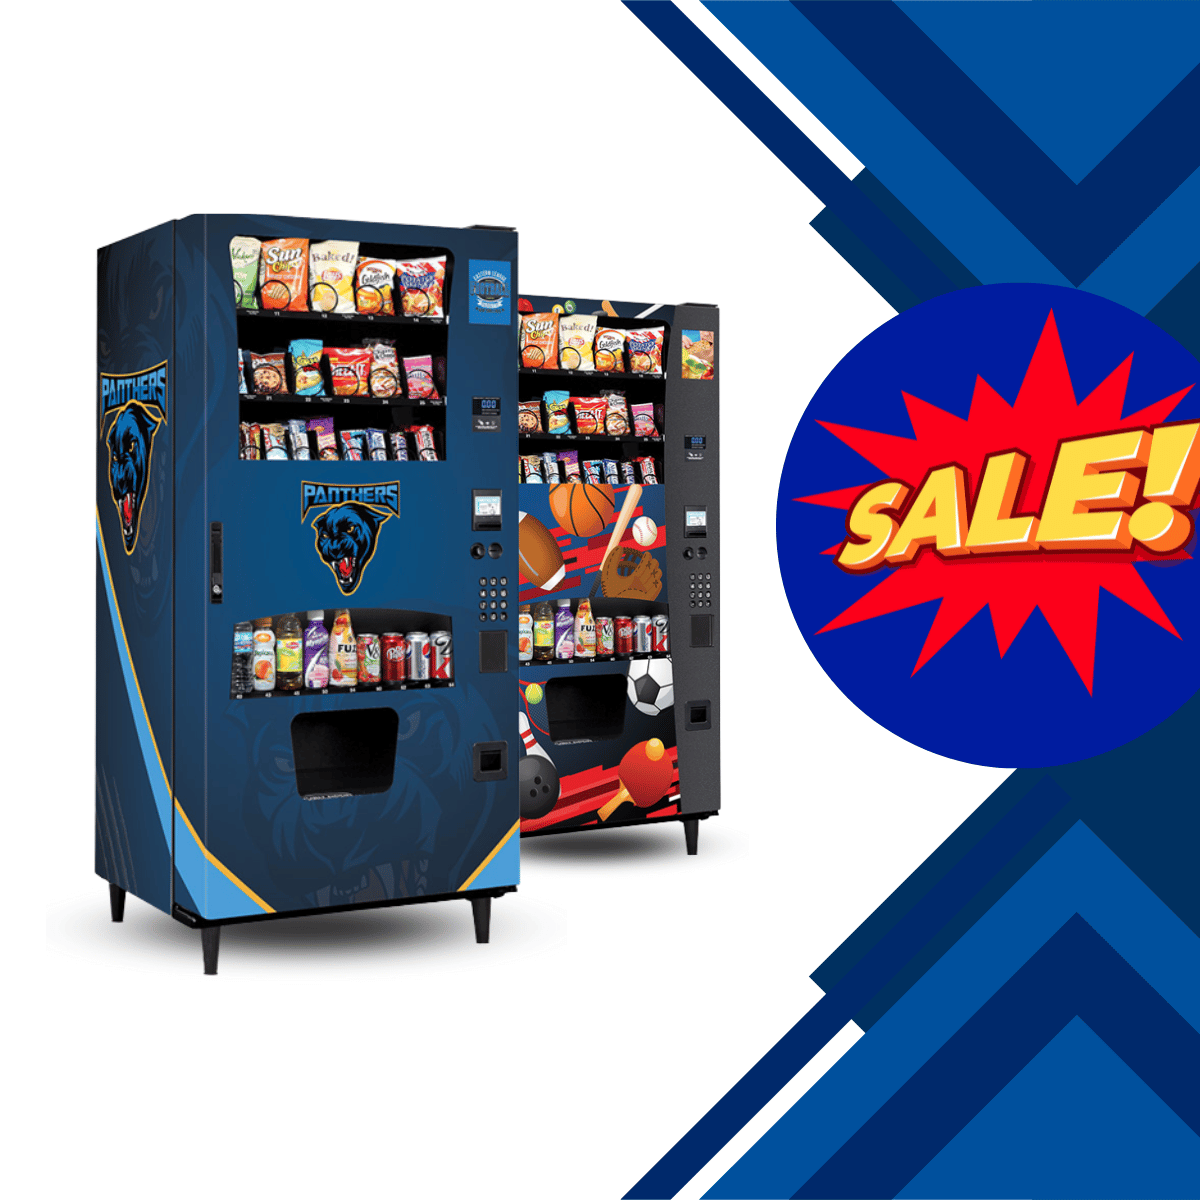 HAVE YOU BEEN LOOKING FOR VENDING MACHINES FOR SALE?